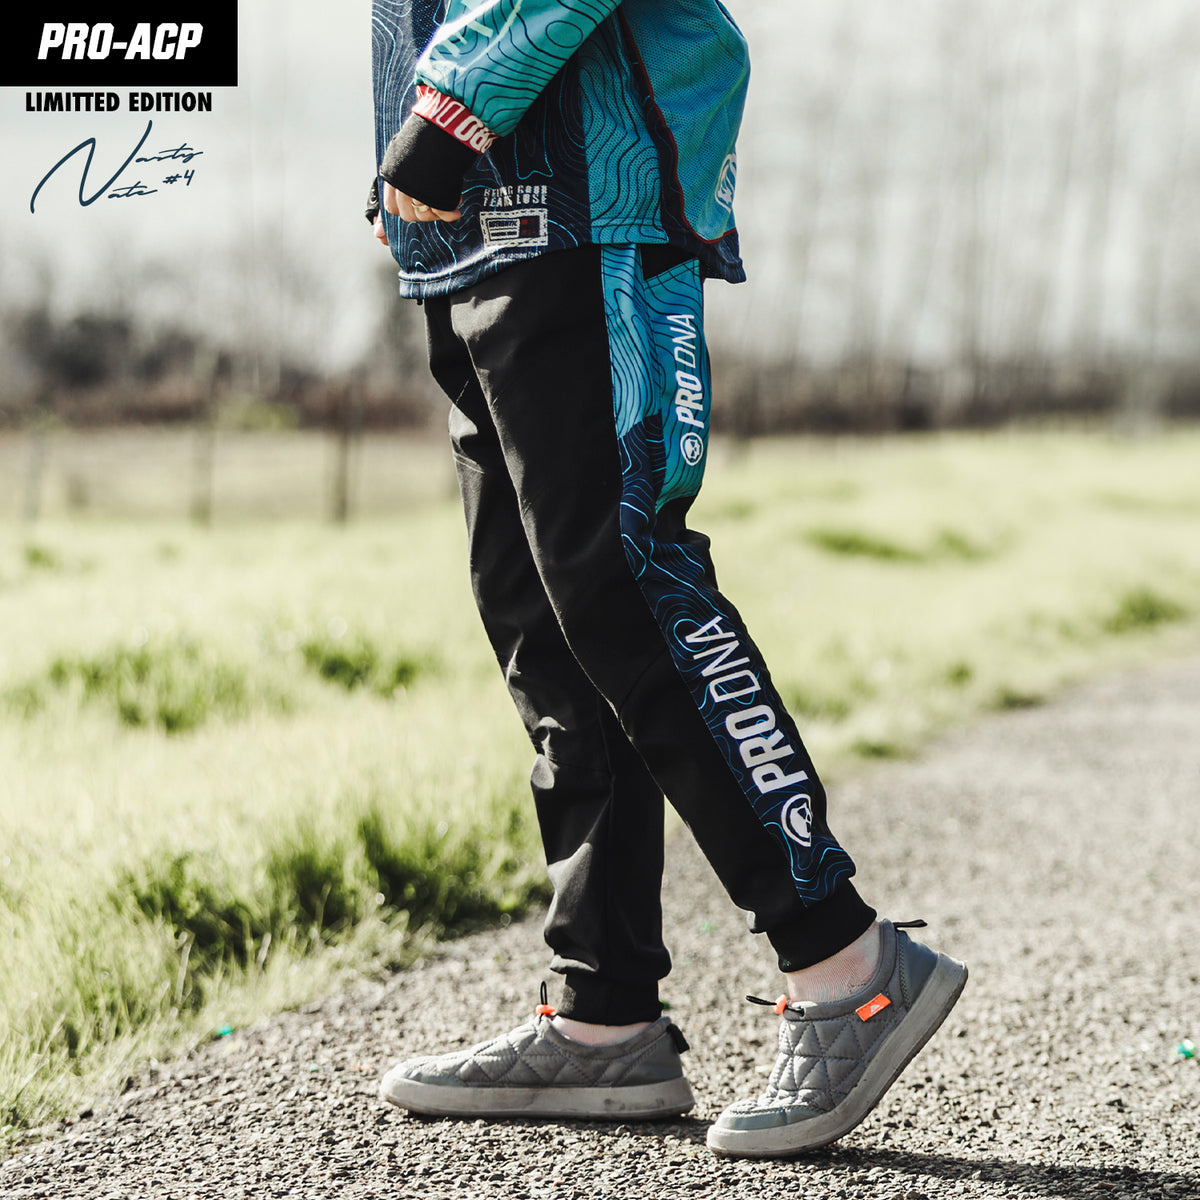 PRO-ACP JOGGERS - Nate Schroder Signature Series (Fear The Deep)